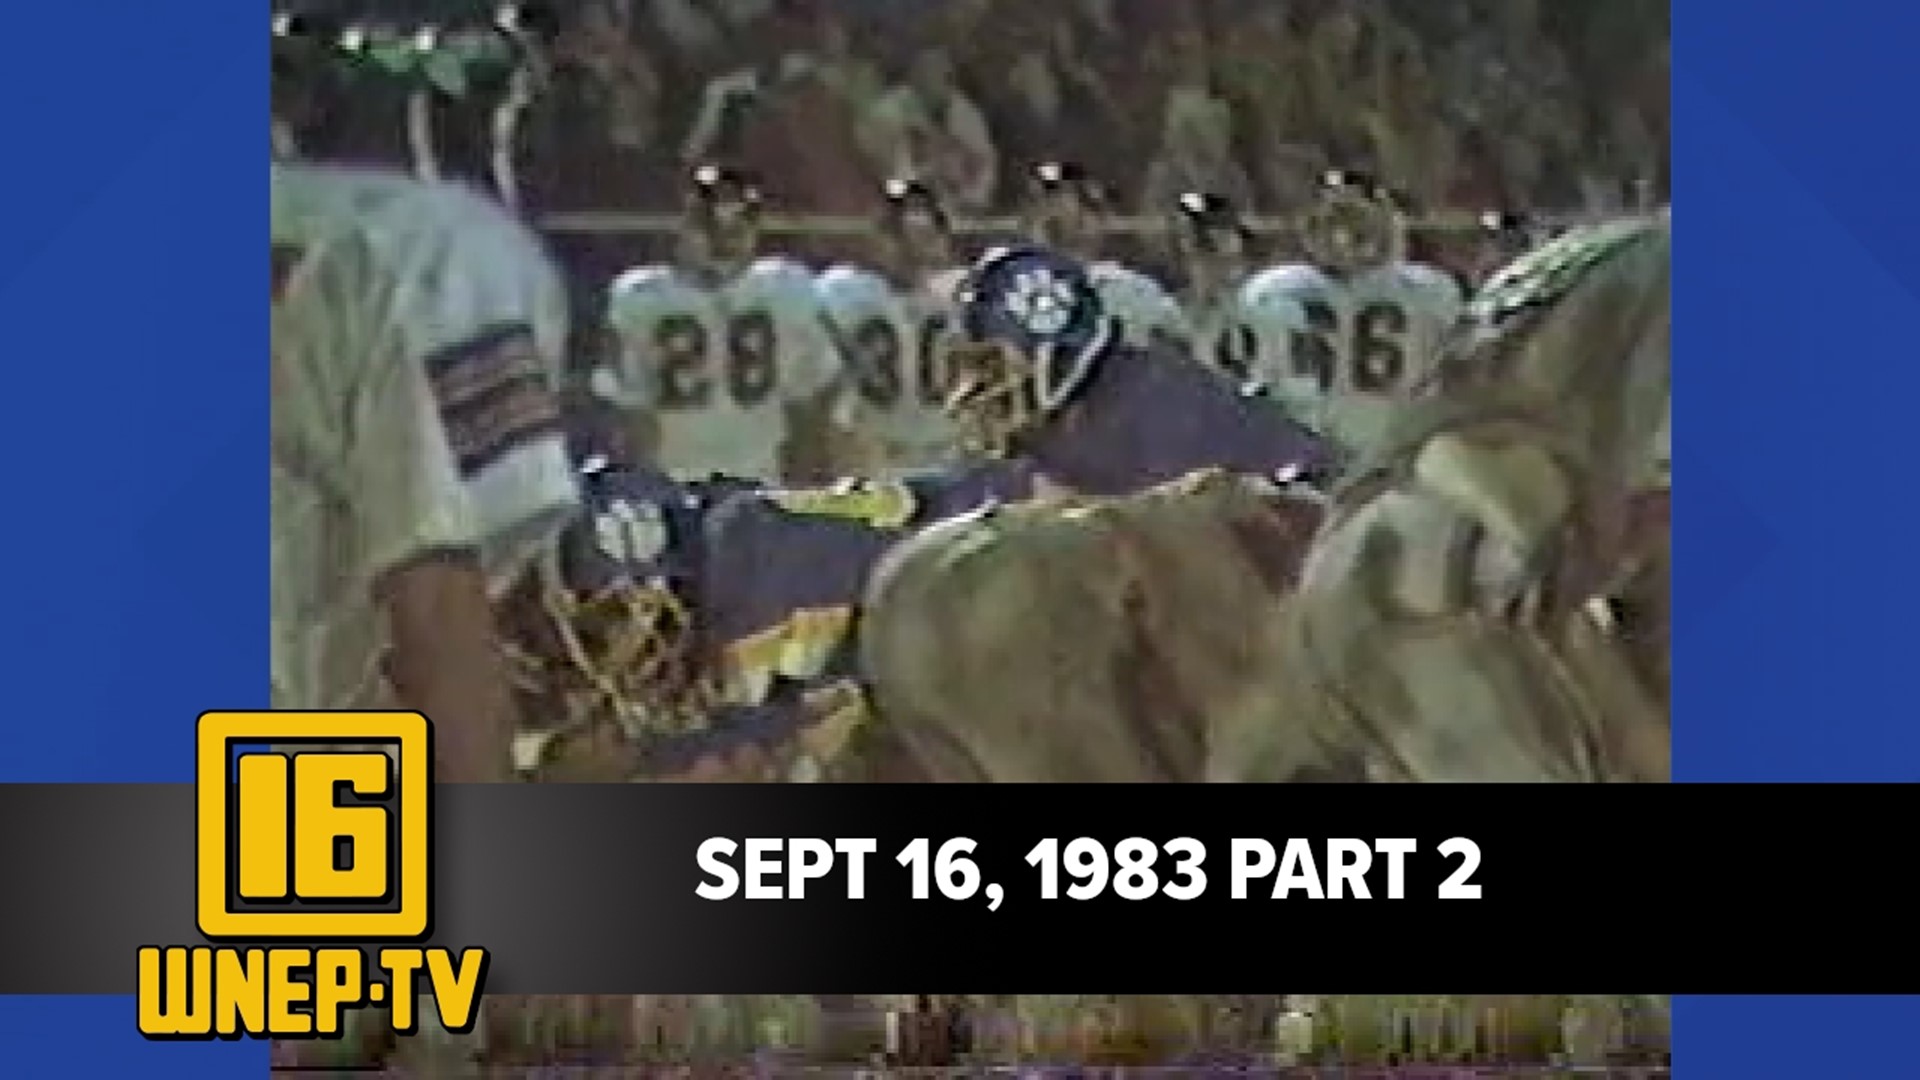 Watch Karen Harch with curated stories from September 16, 1983.